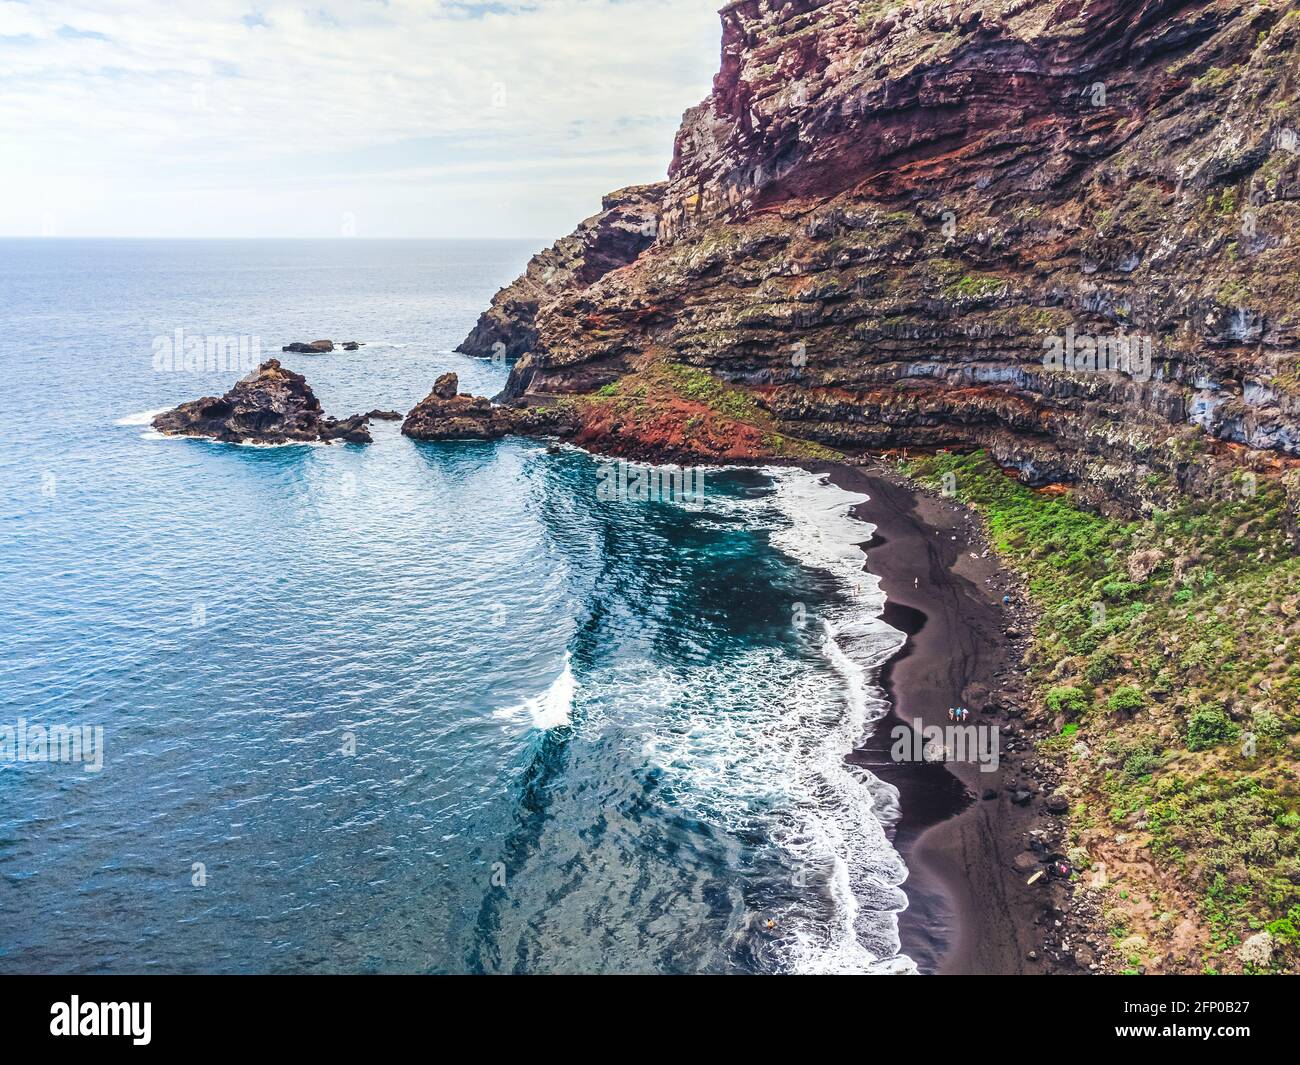 Rocky, volcanic beach and unsettled atlantic ocean. La Palma Island. Aerial view. Stock Photo